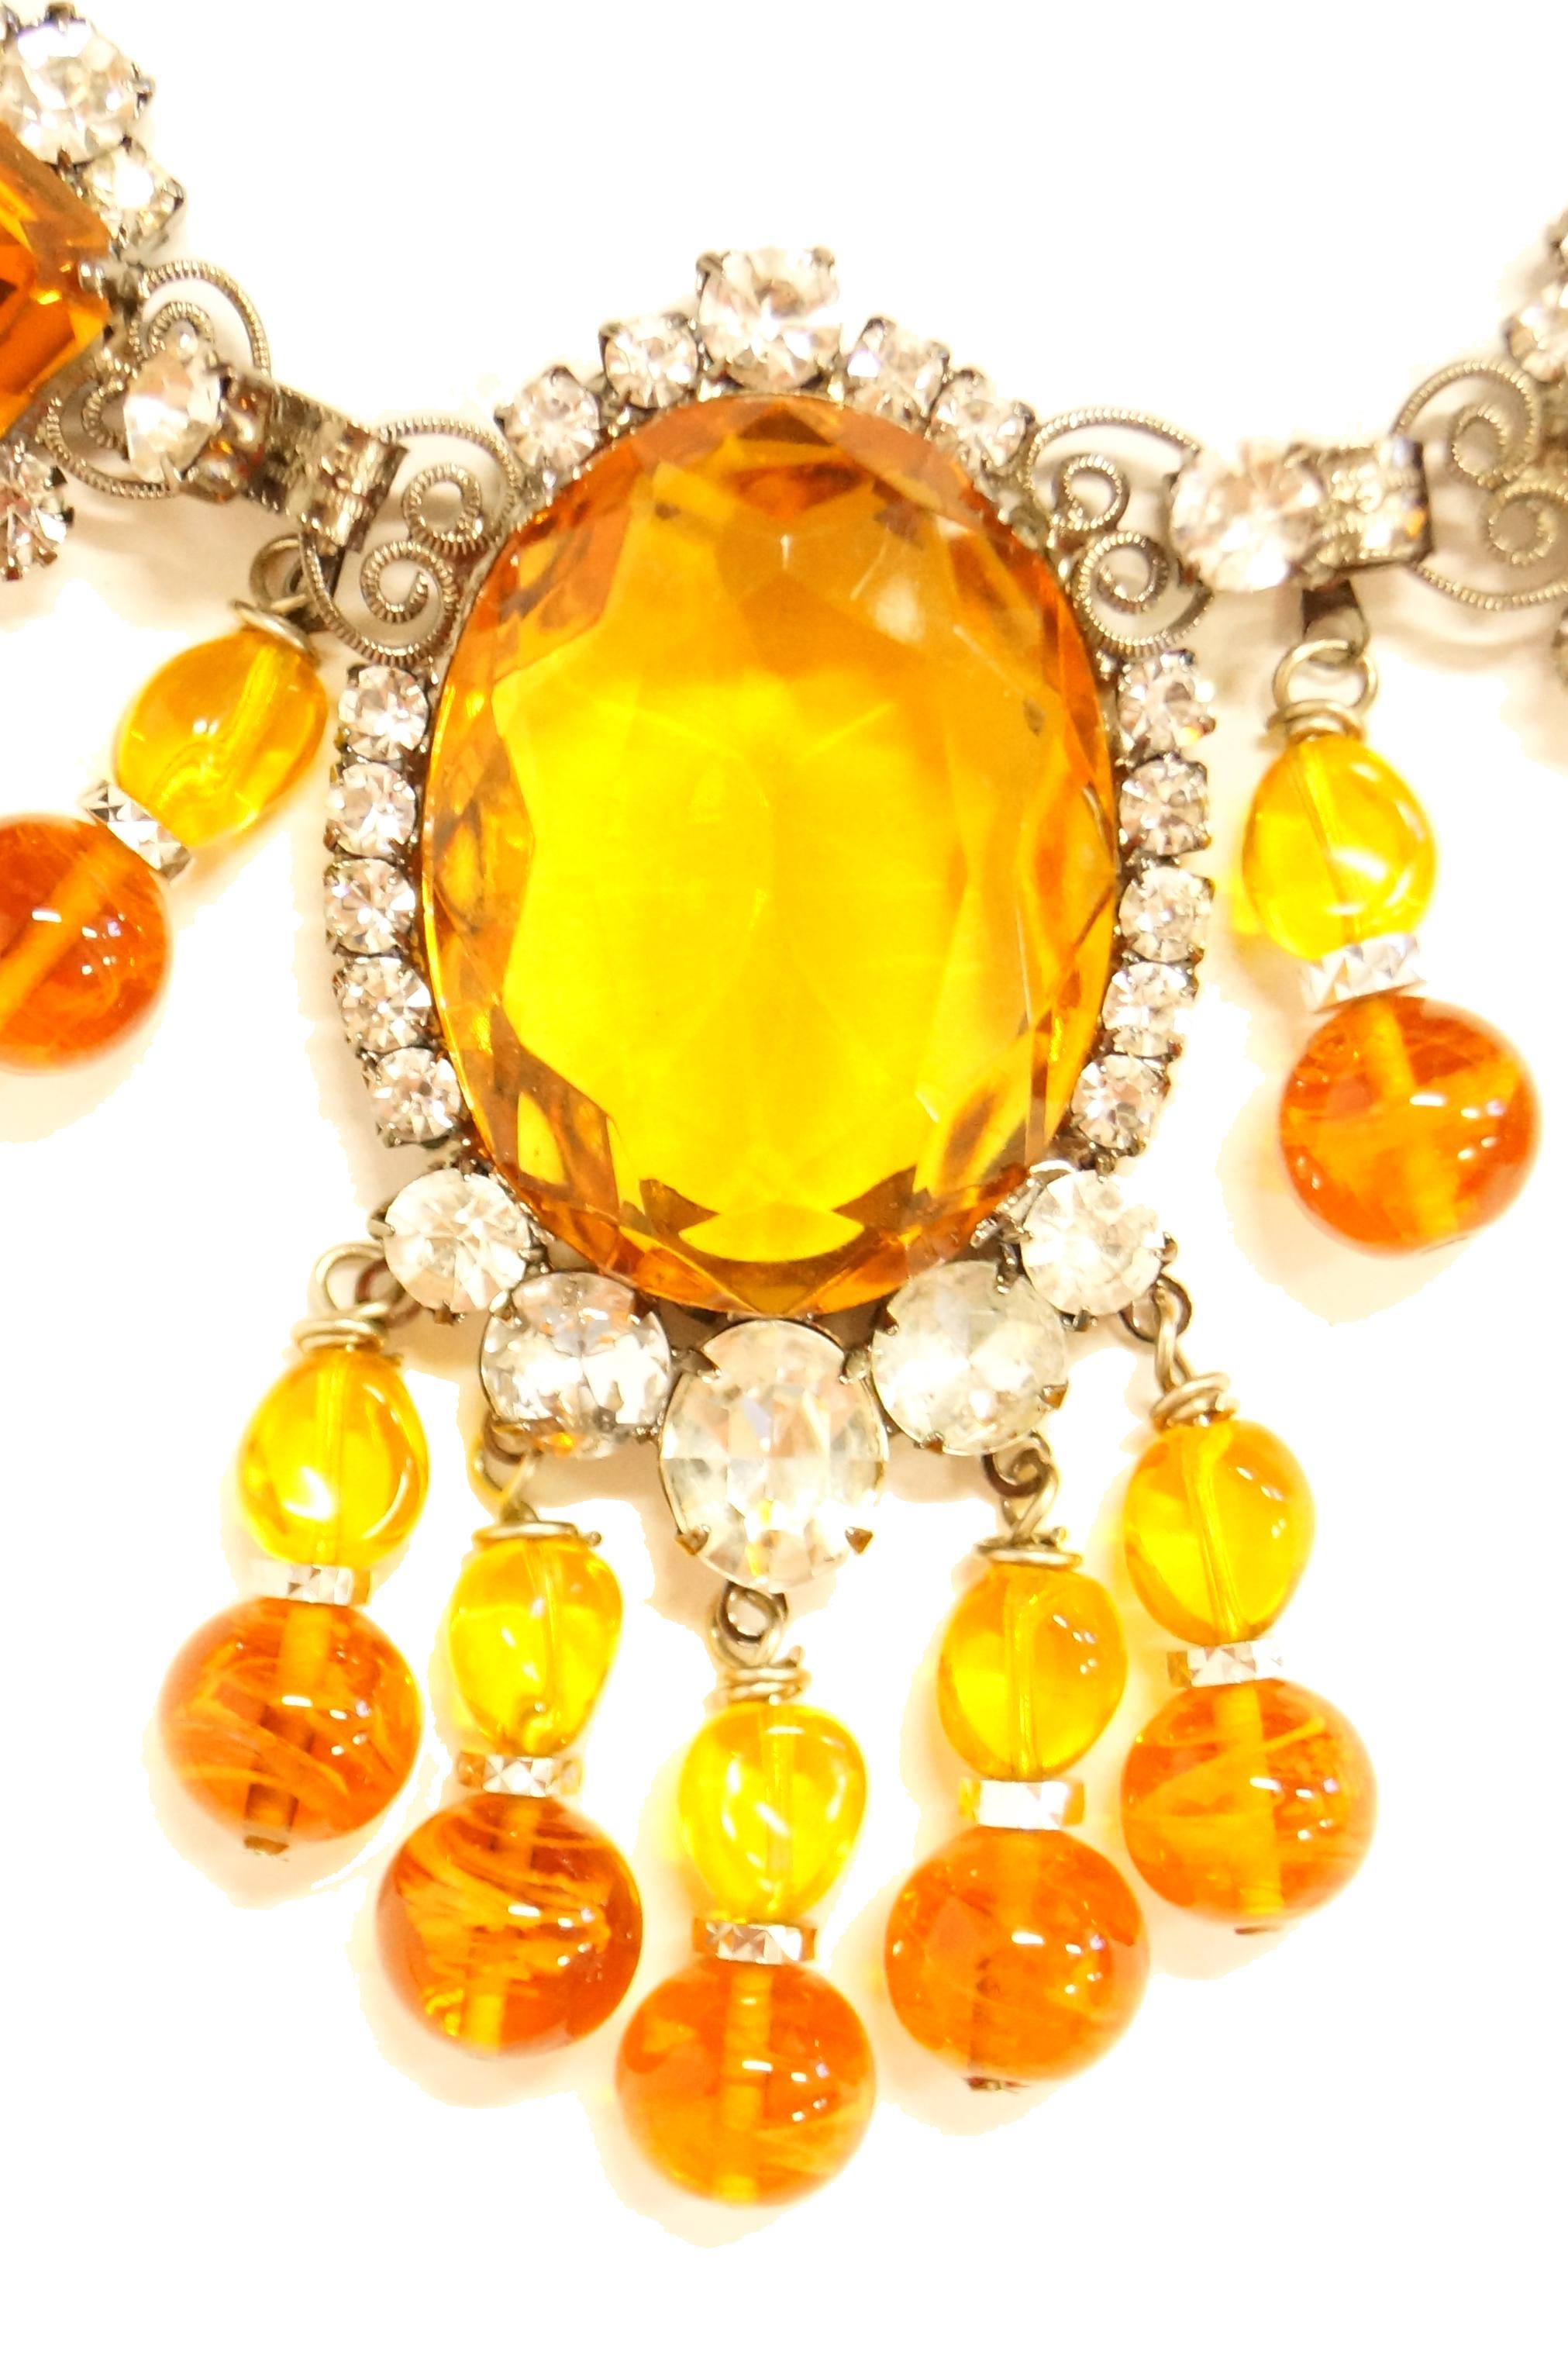 Gorgeous bright yellow necklace and earrings set by Lawrence Vrba! The oversized bib necklace is incredible, and features a brilliant oversized oval cut crystal center bordered by small clear multifaceted rhinestones. The top of the oval features a